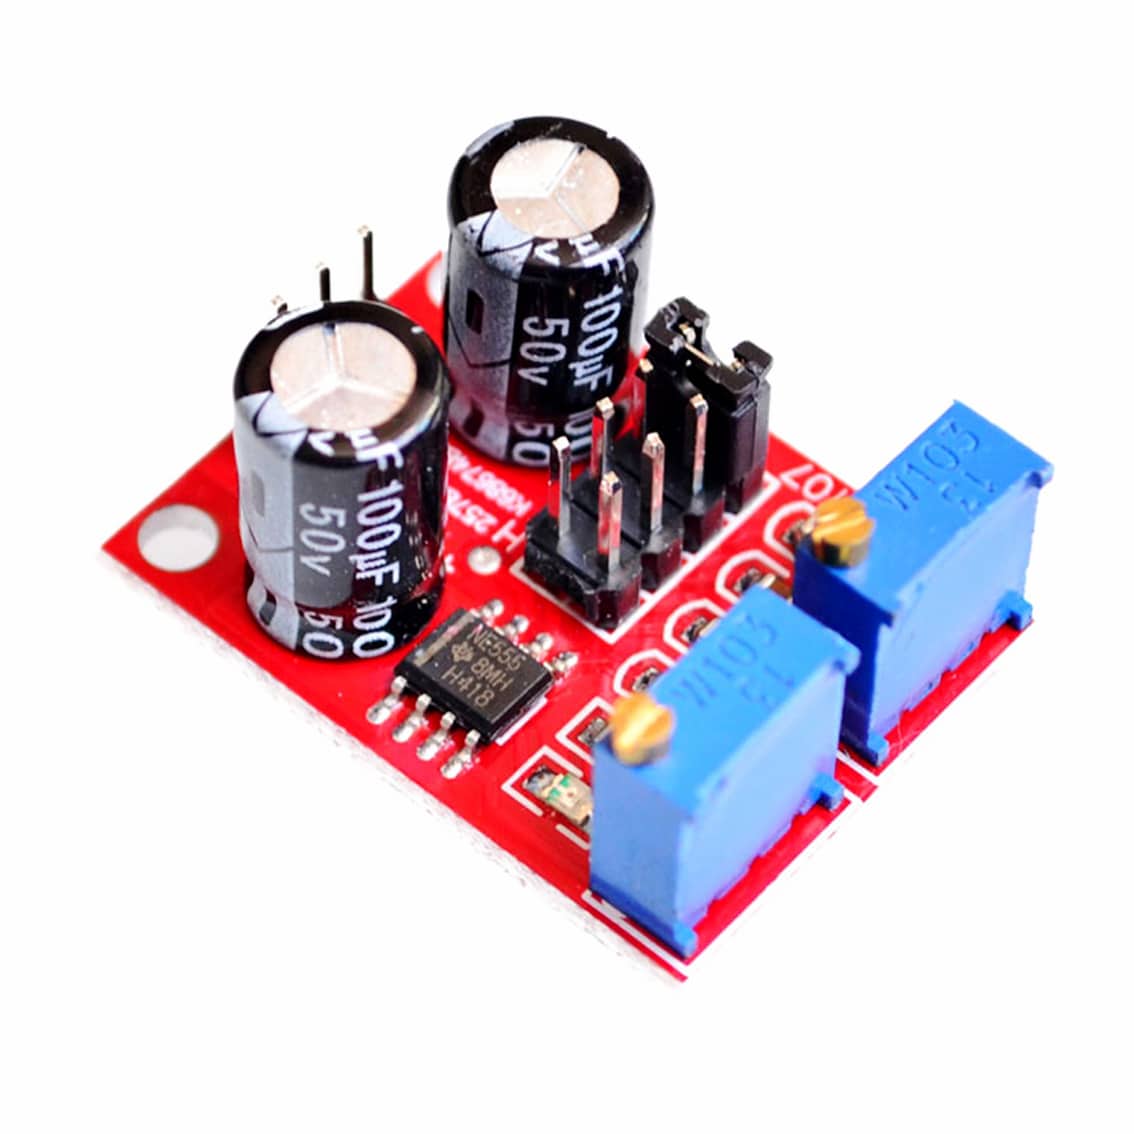 NE555 Adjustable Pulse Frequency and Duty Cycle Module 2